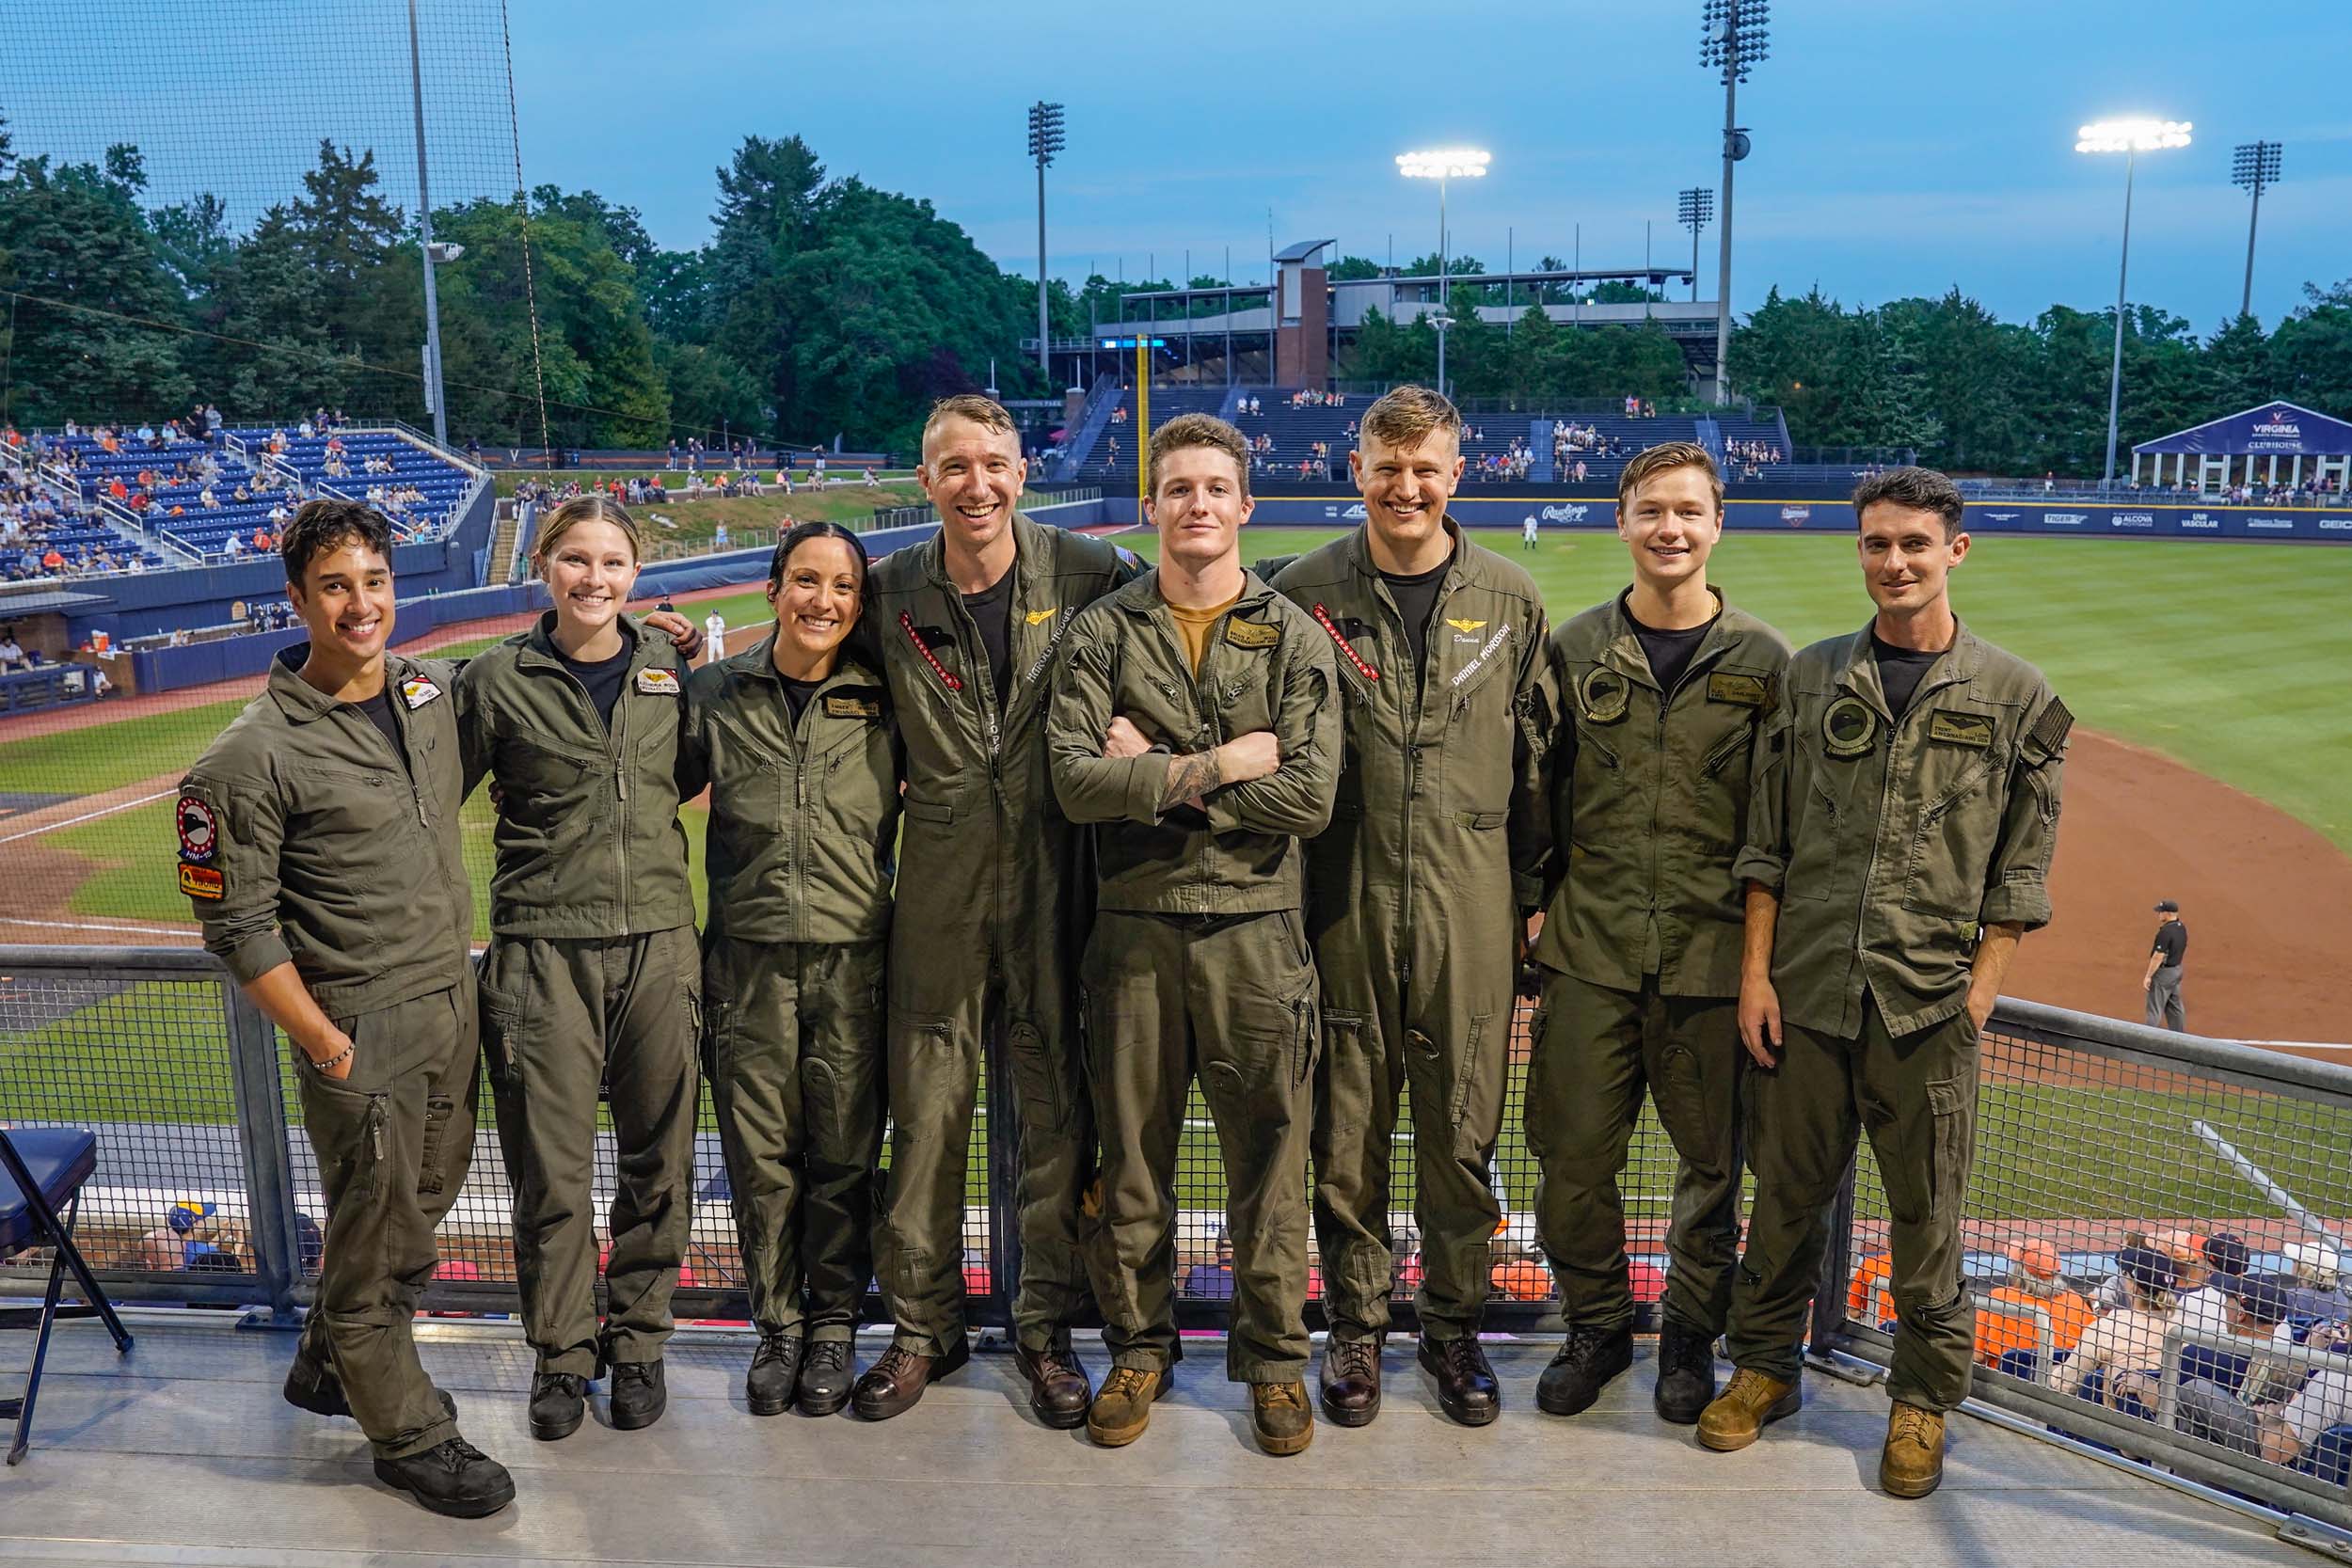 Lt. Sam Hodges and the rest of the helicopter flyover crew at the game